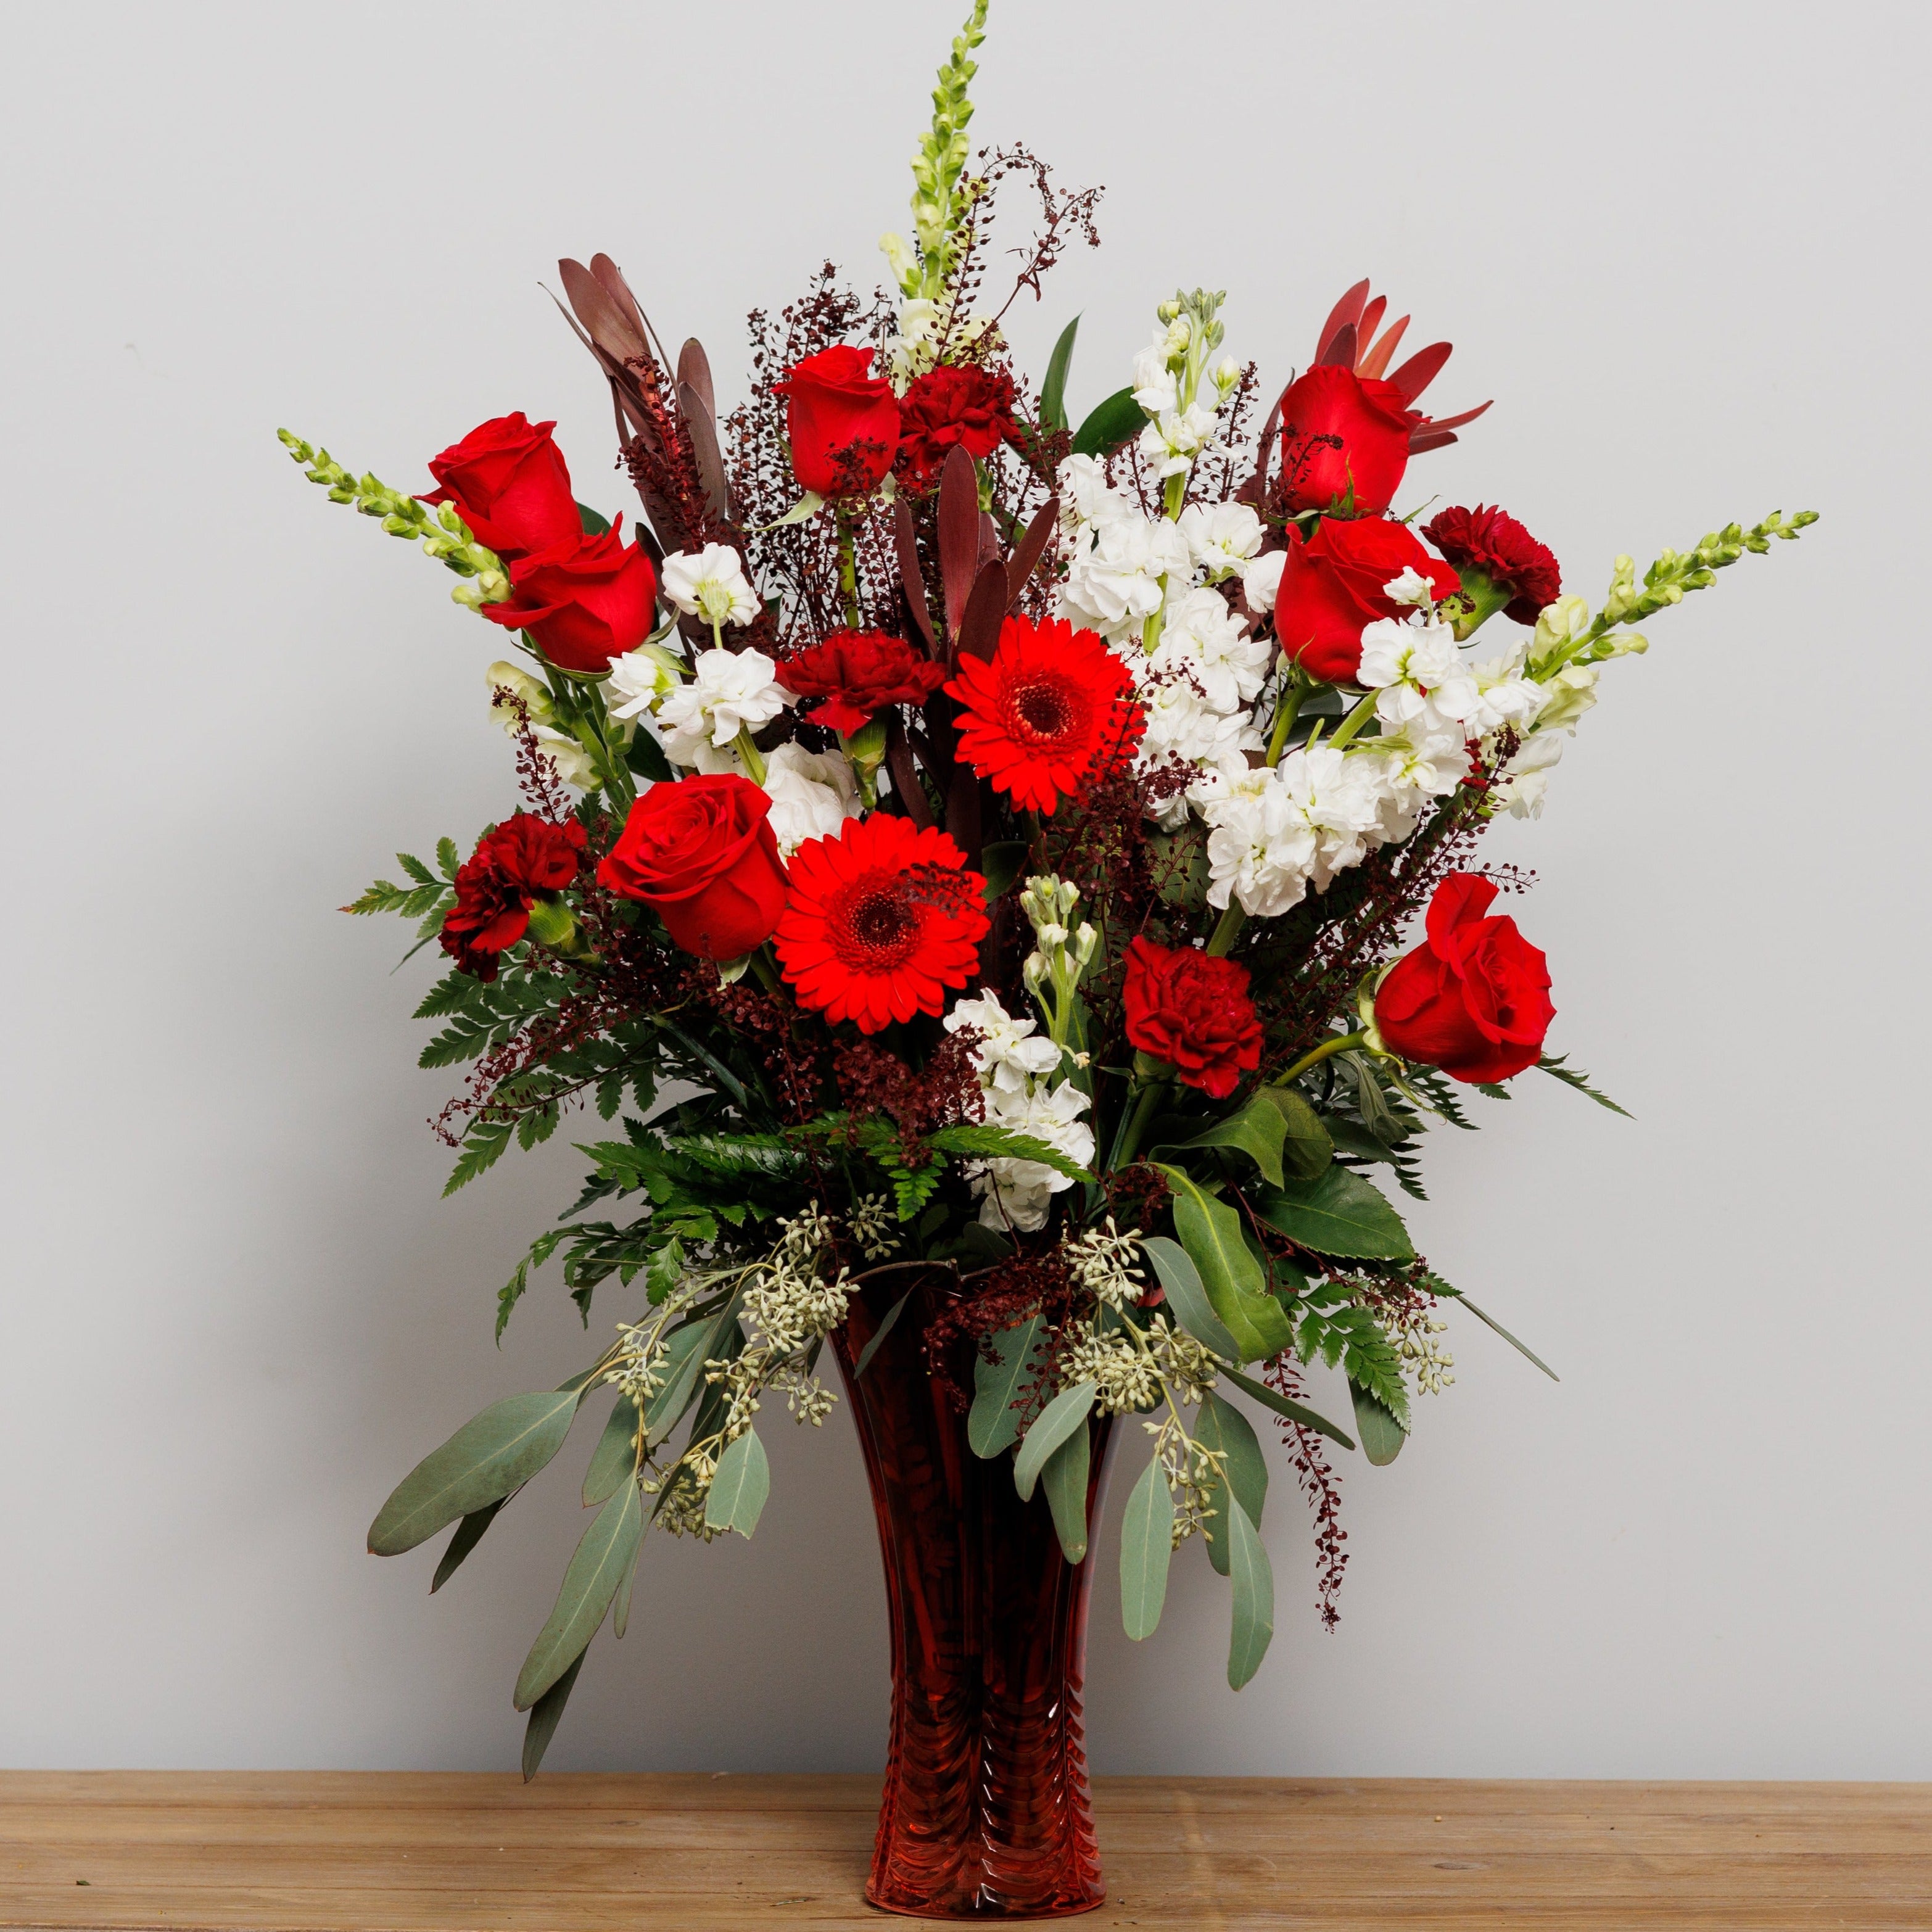 A tall red and white arrangement in a red vase.